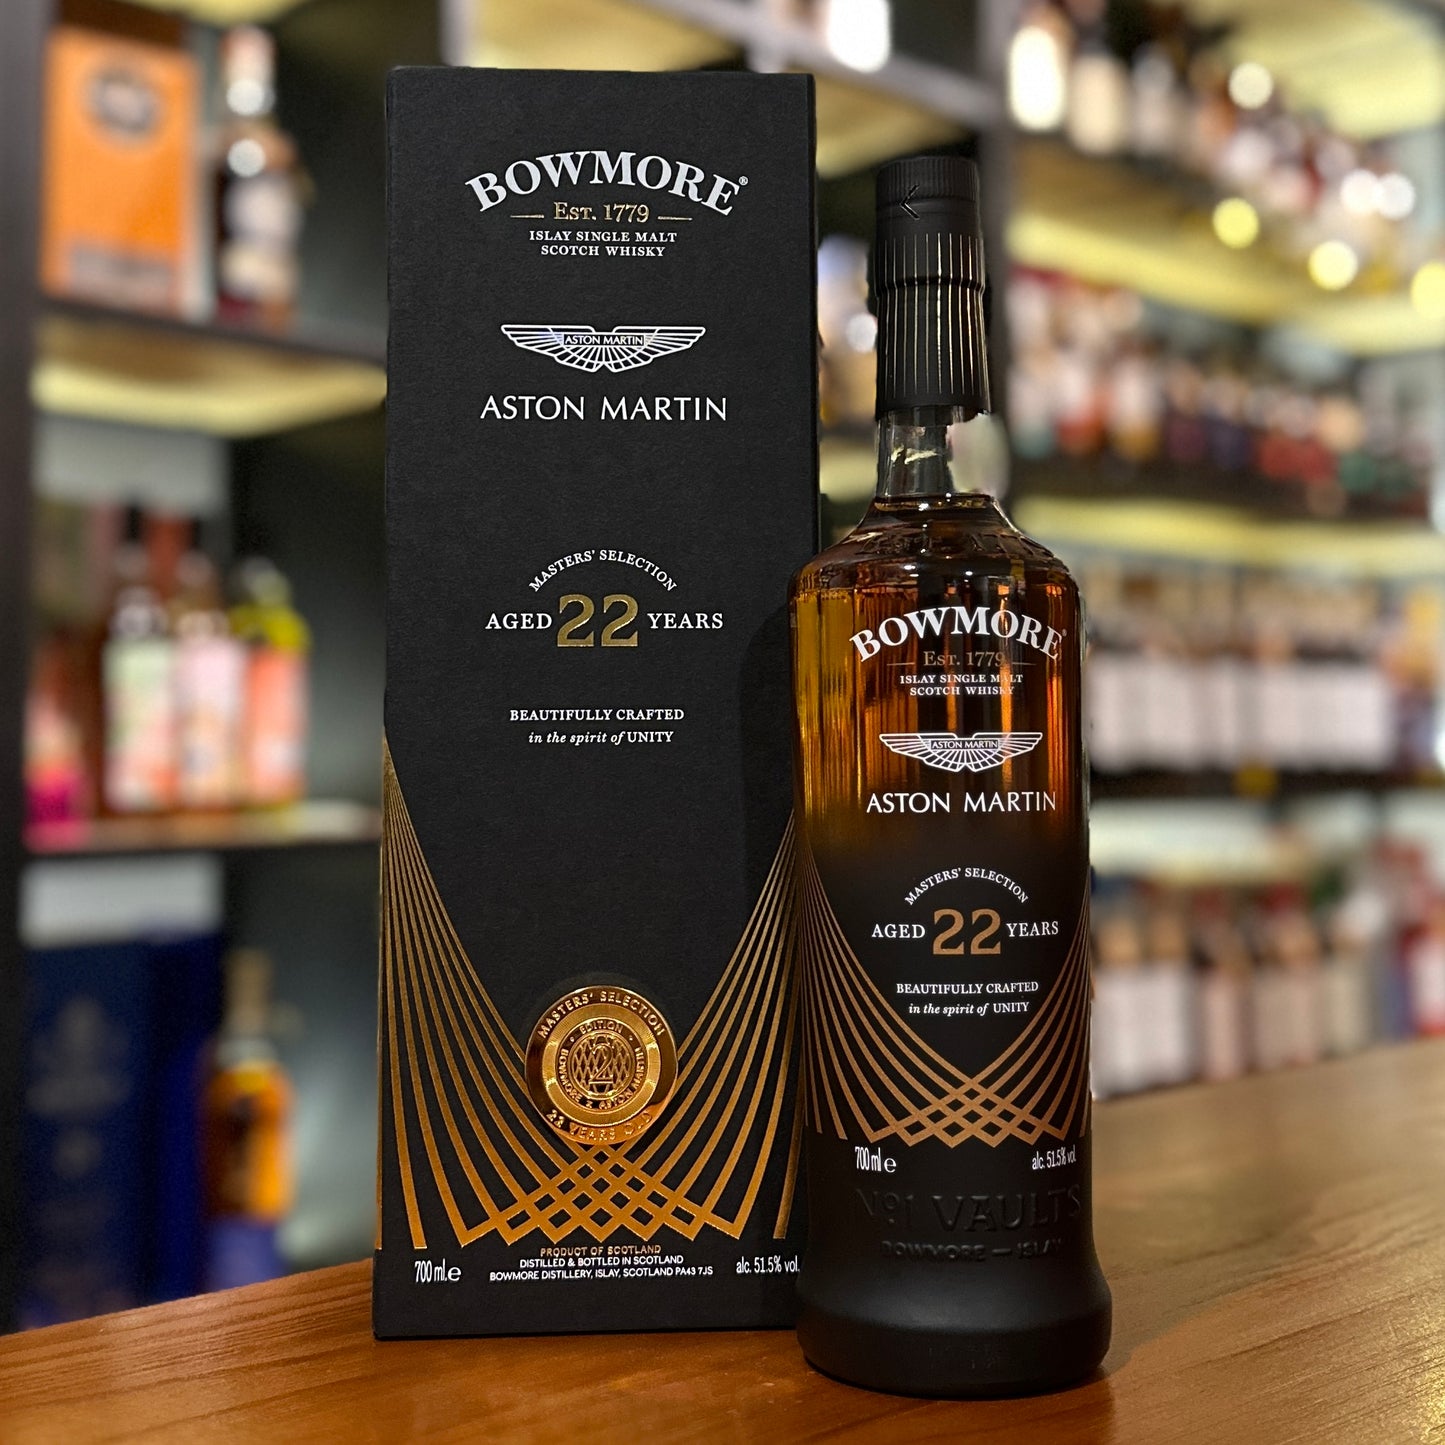 Bowmore 22 Year Old Aston Martin Masters’ Selection Single Malt Scotch Whisky (2nd Edition)